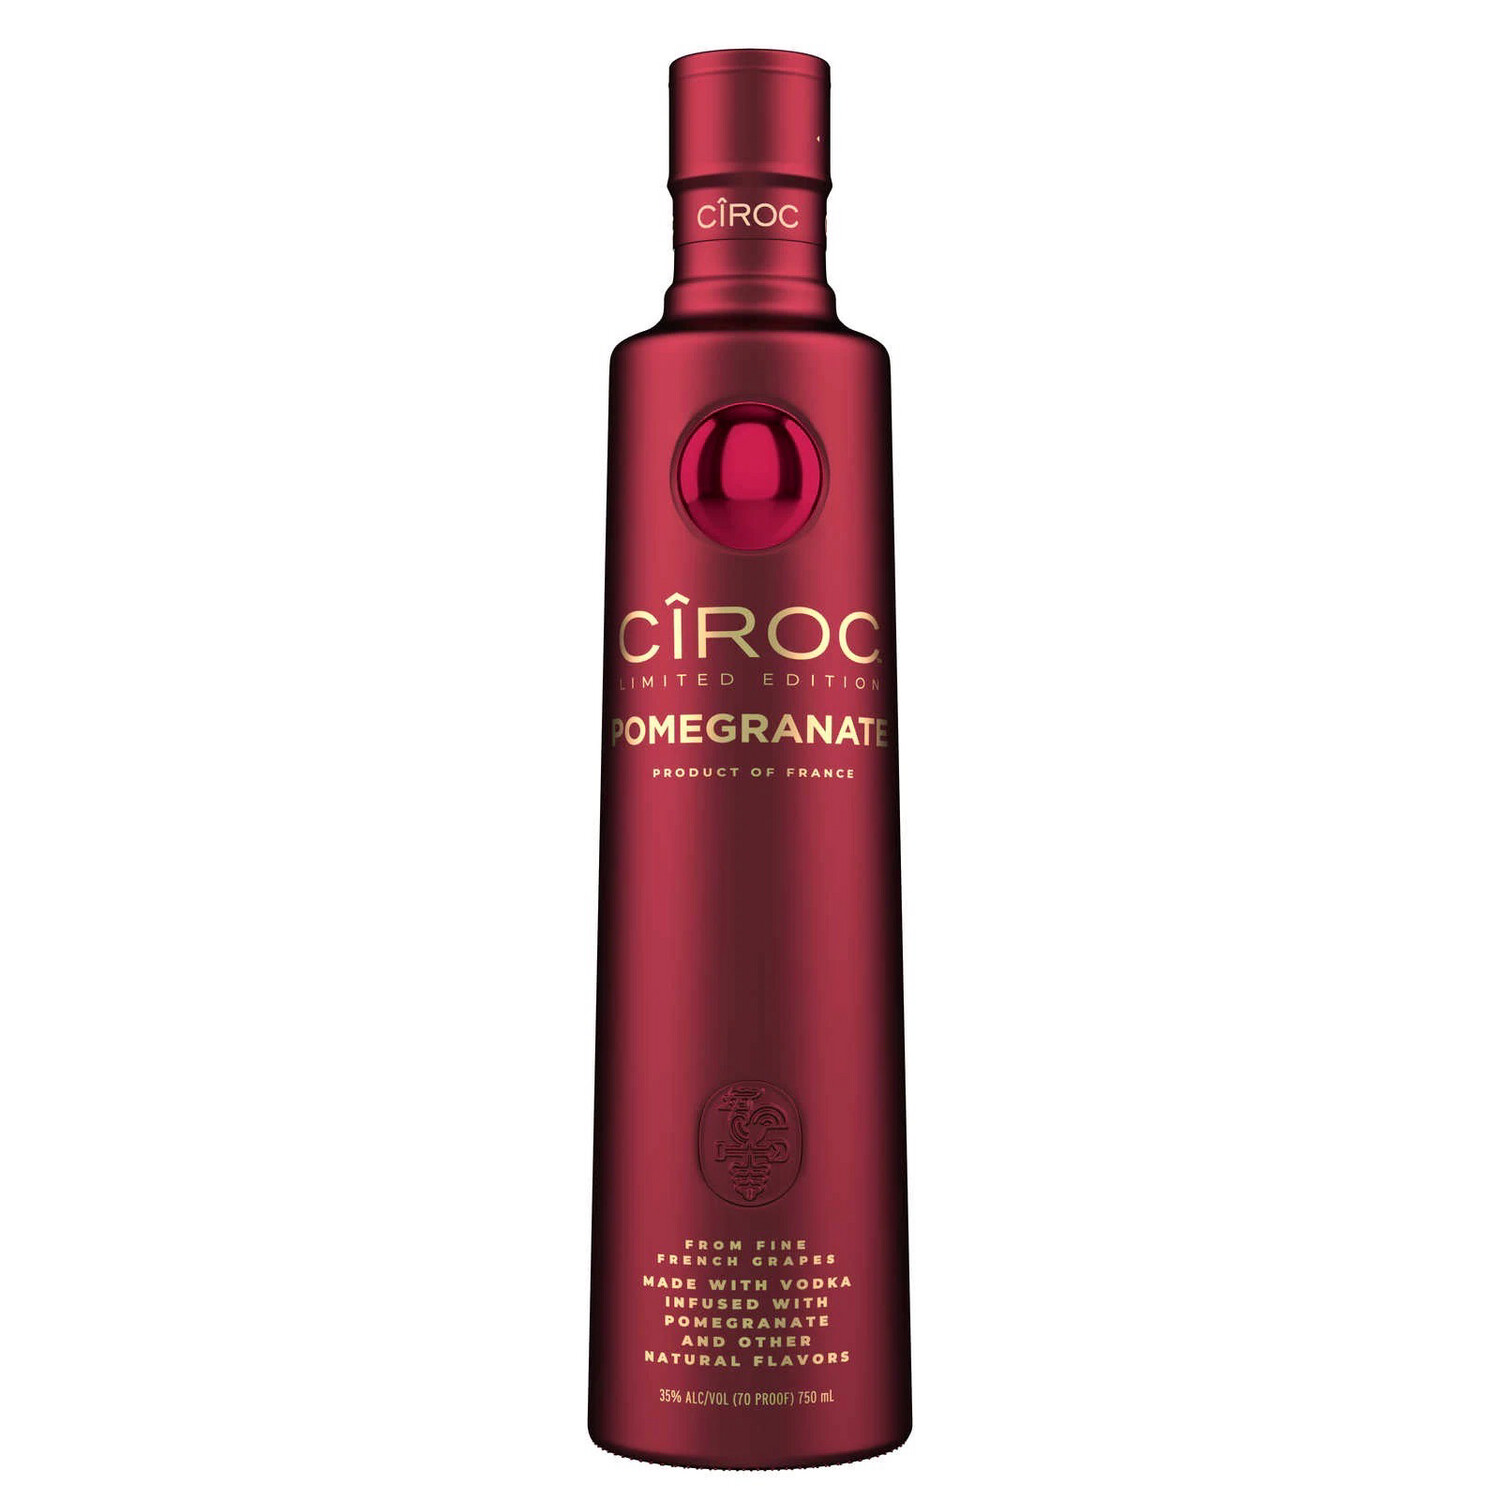 Ciroc PassionFruit Limited Edition